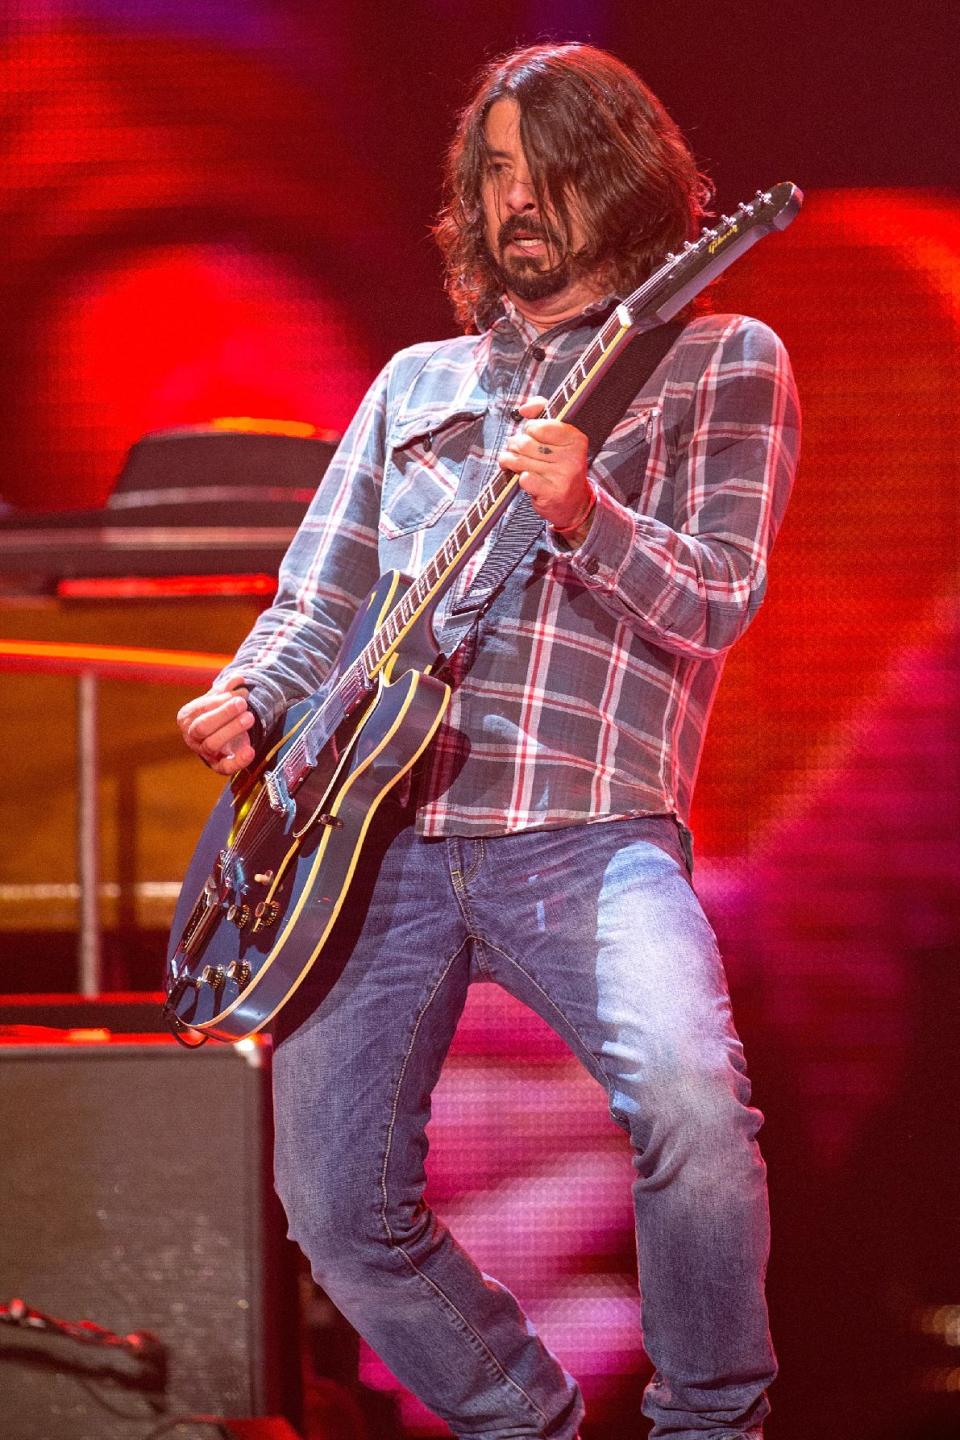 FILE - This May 18, 2013 file photo shows Dave Grohl performing as a special guest with the Rolling Stones at Honda Center in Anaheim, Calif. When Zac Brown bumped into Dave Grohl while picking up some altered clothes for the Grammy Awards, he didn't let the random meeting go to waste. They bonded over their love of analog recording gear and their new friendship eventually resulted in Zac Brown Band's newest release: "The Grohl Sessions Vol. 1." (Photo by Paul A. Hebert/Invision/AP, File)